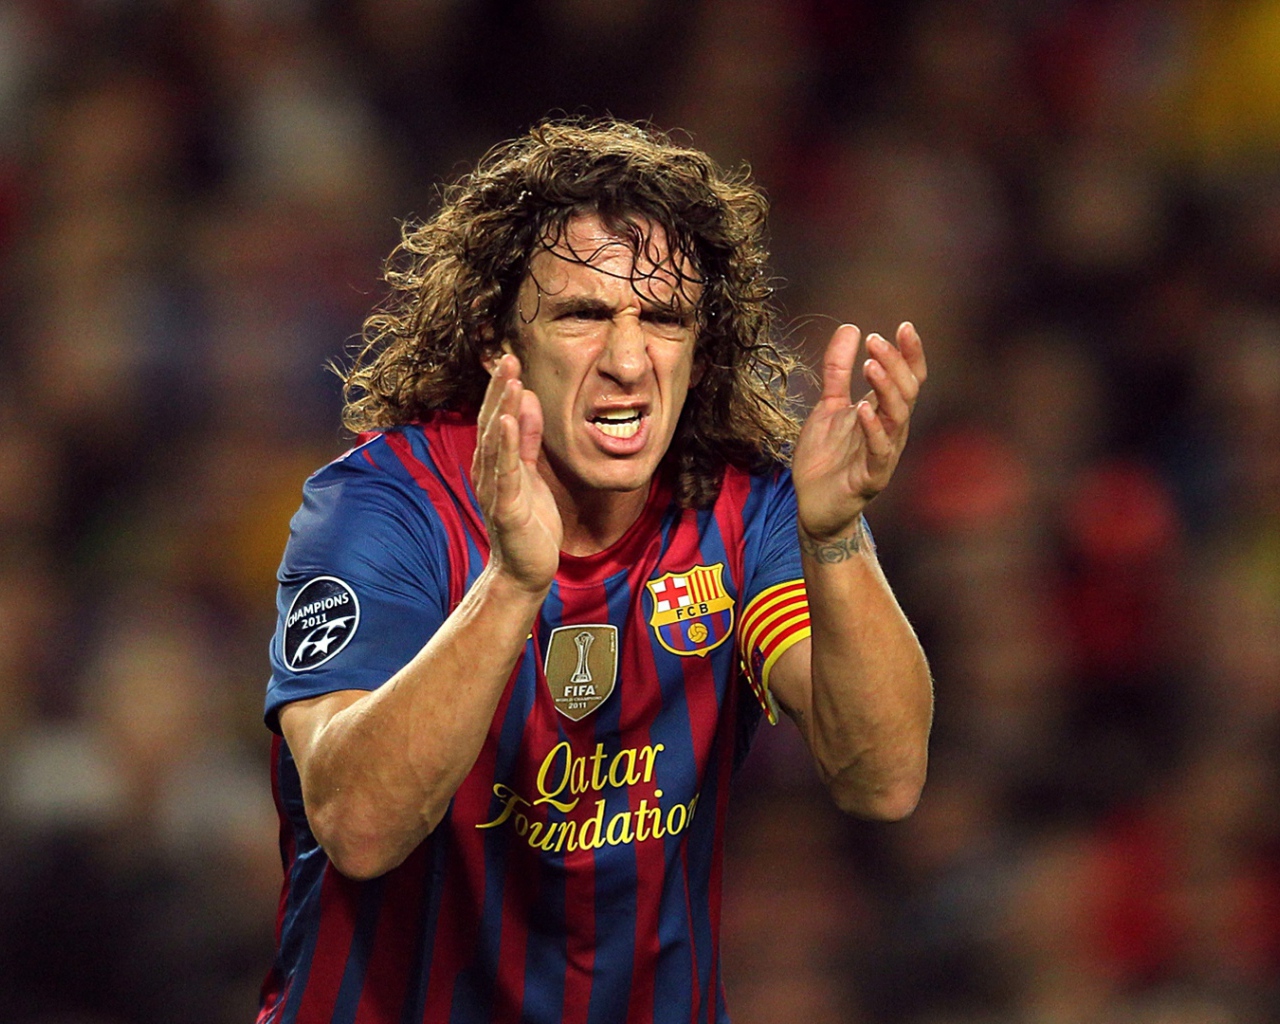 The player of Barcelona Carles Puyol applauding